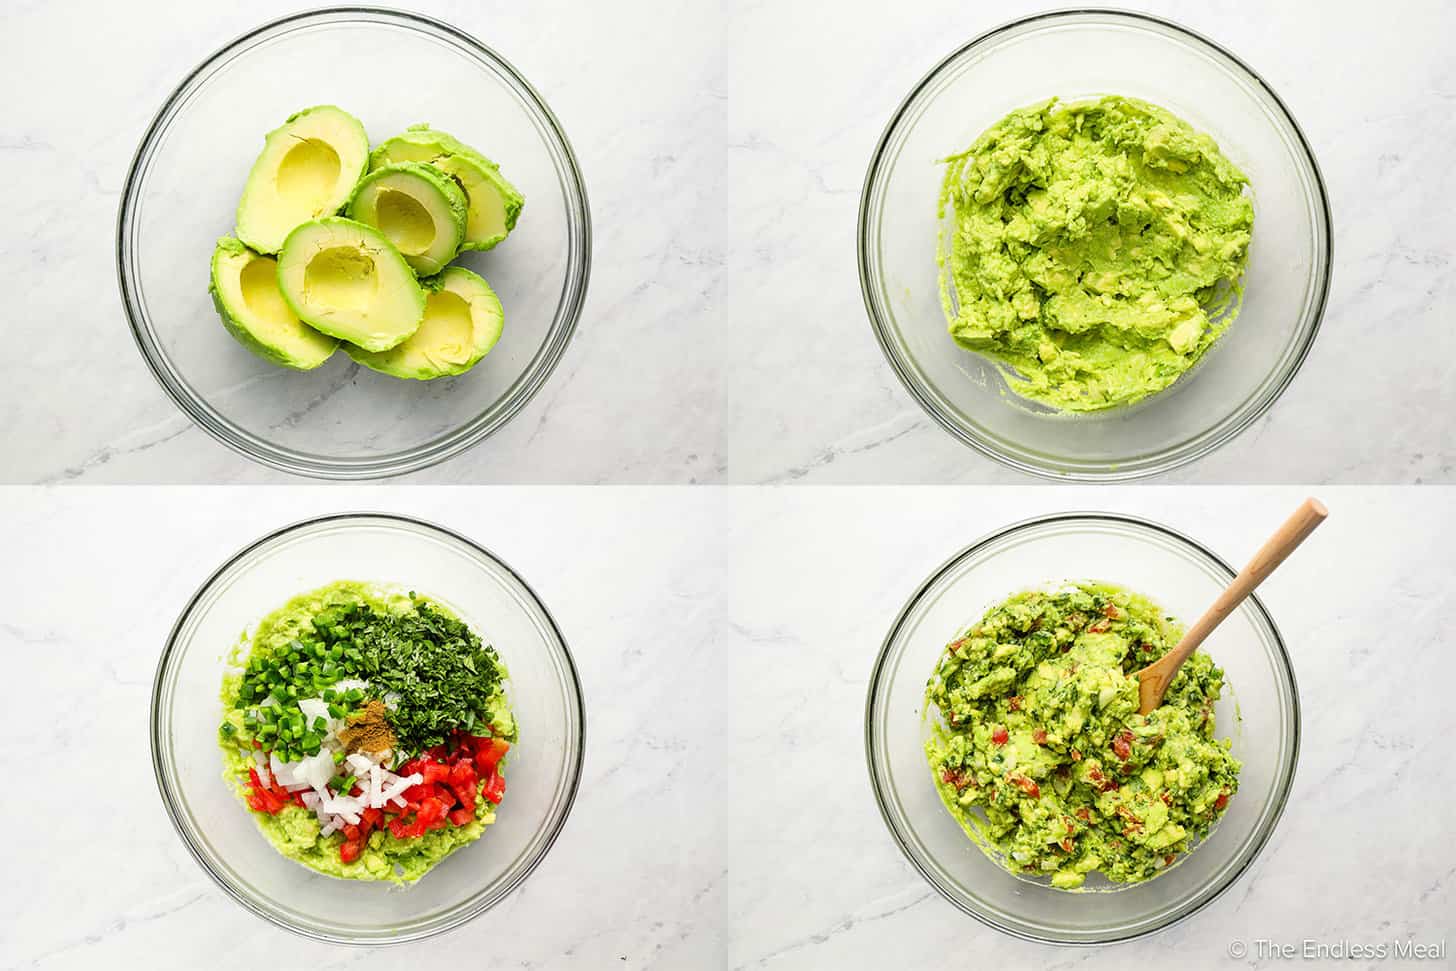 4 pictures showing how to make this recipe for easy guacamole